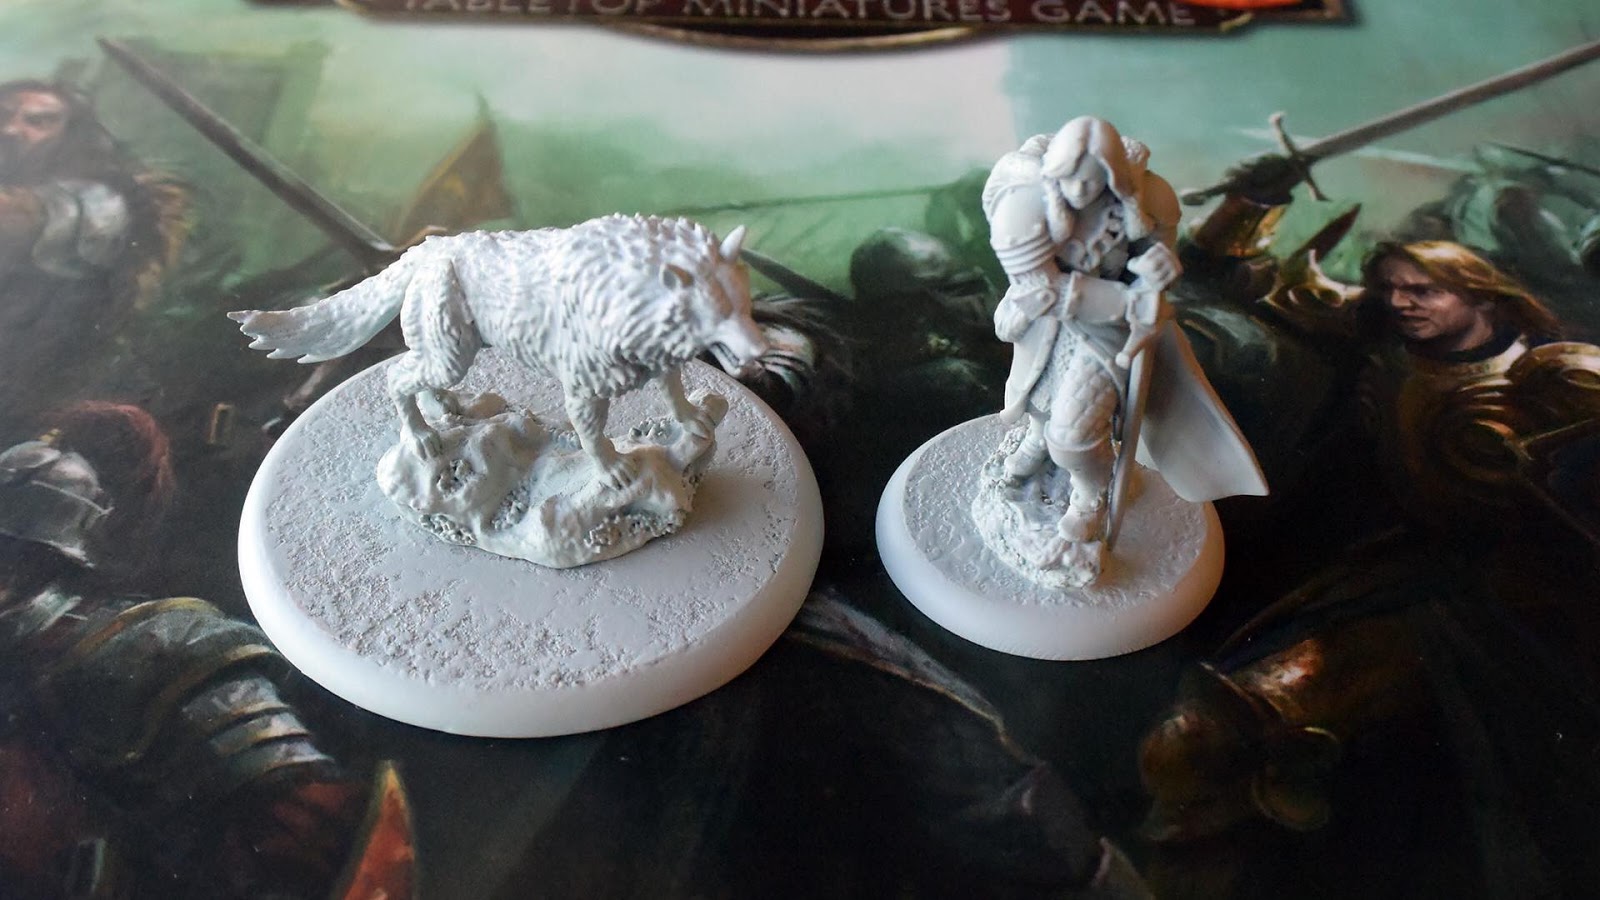 A song of ice and fire miniatures game Stark